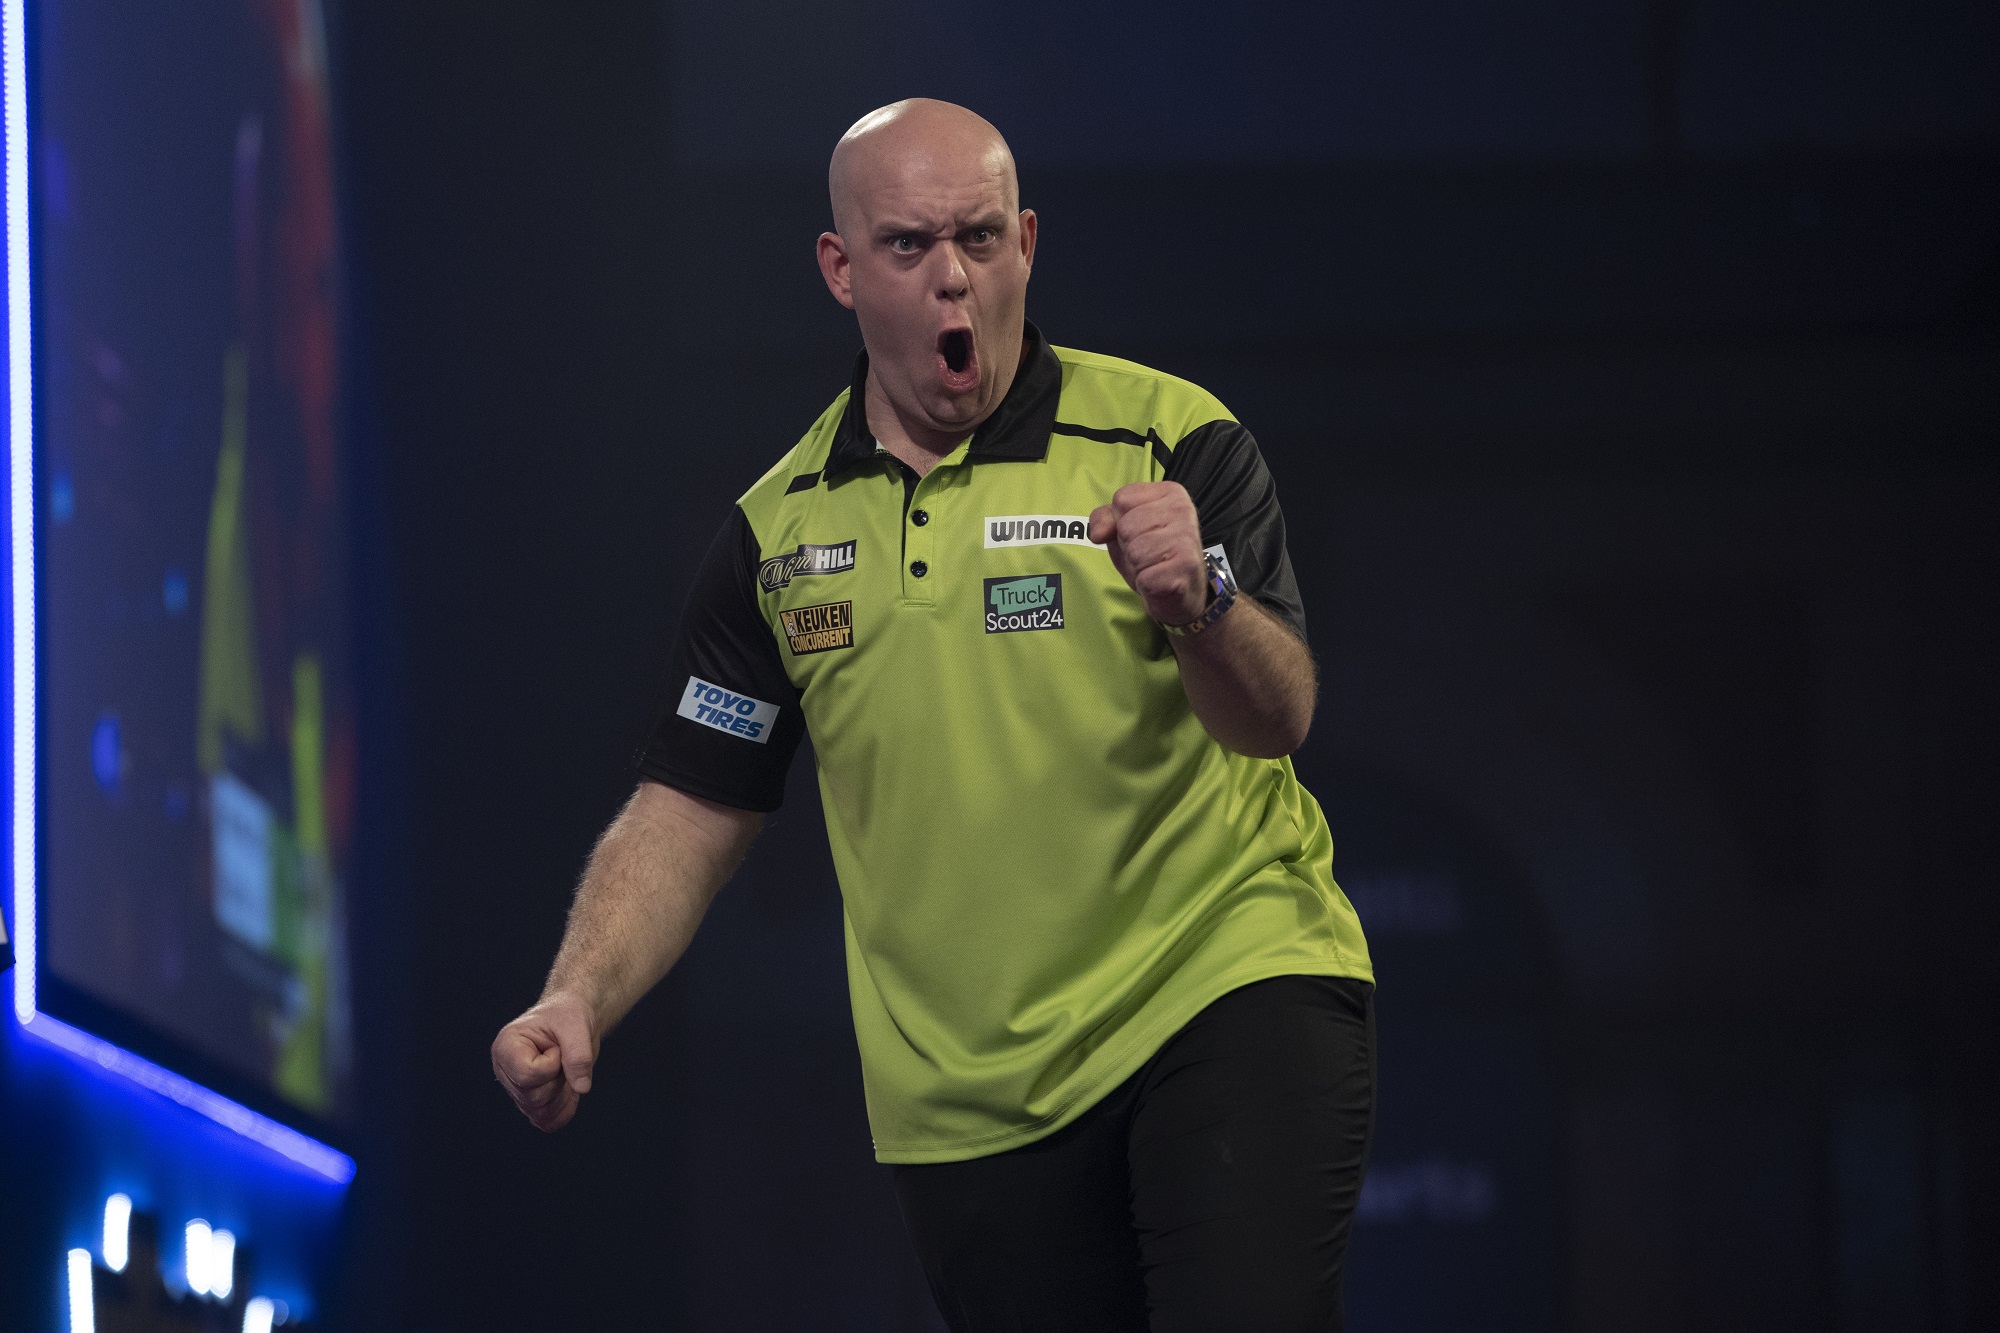 Michael van Gerwen on Peter Wright mind games “If you talk so much crap, things like that will happen to you”